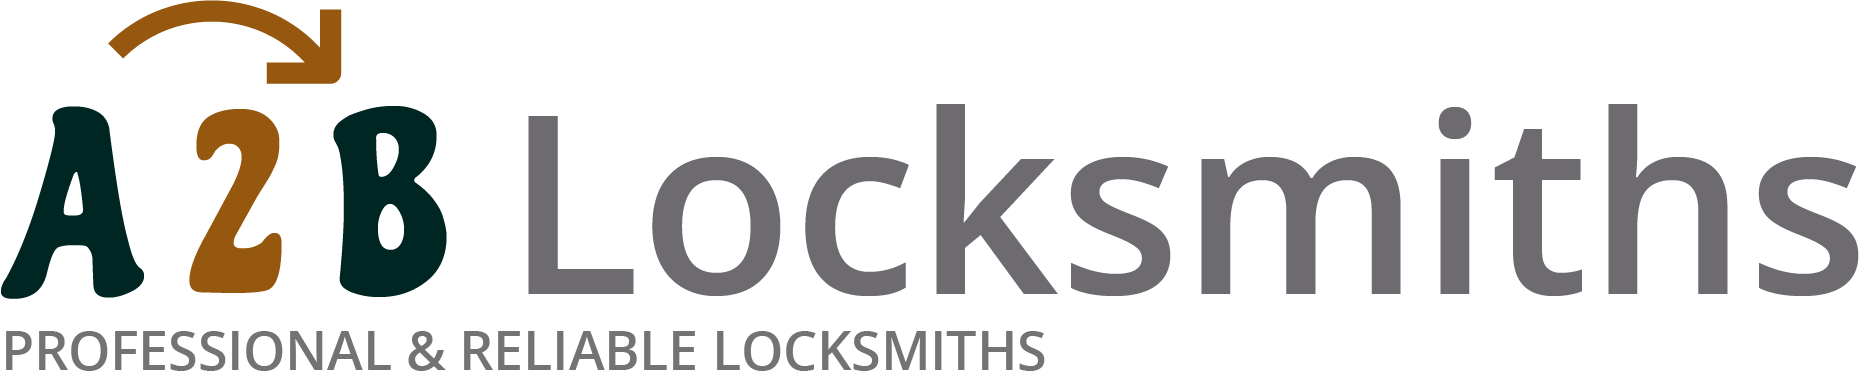 If you are locked out of house in Melton Mowbray, our 24/7 local emergency locksmith services can help you.